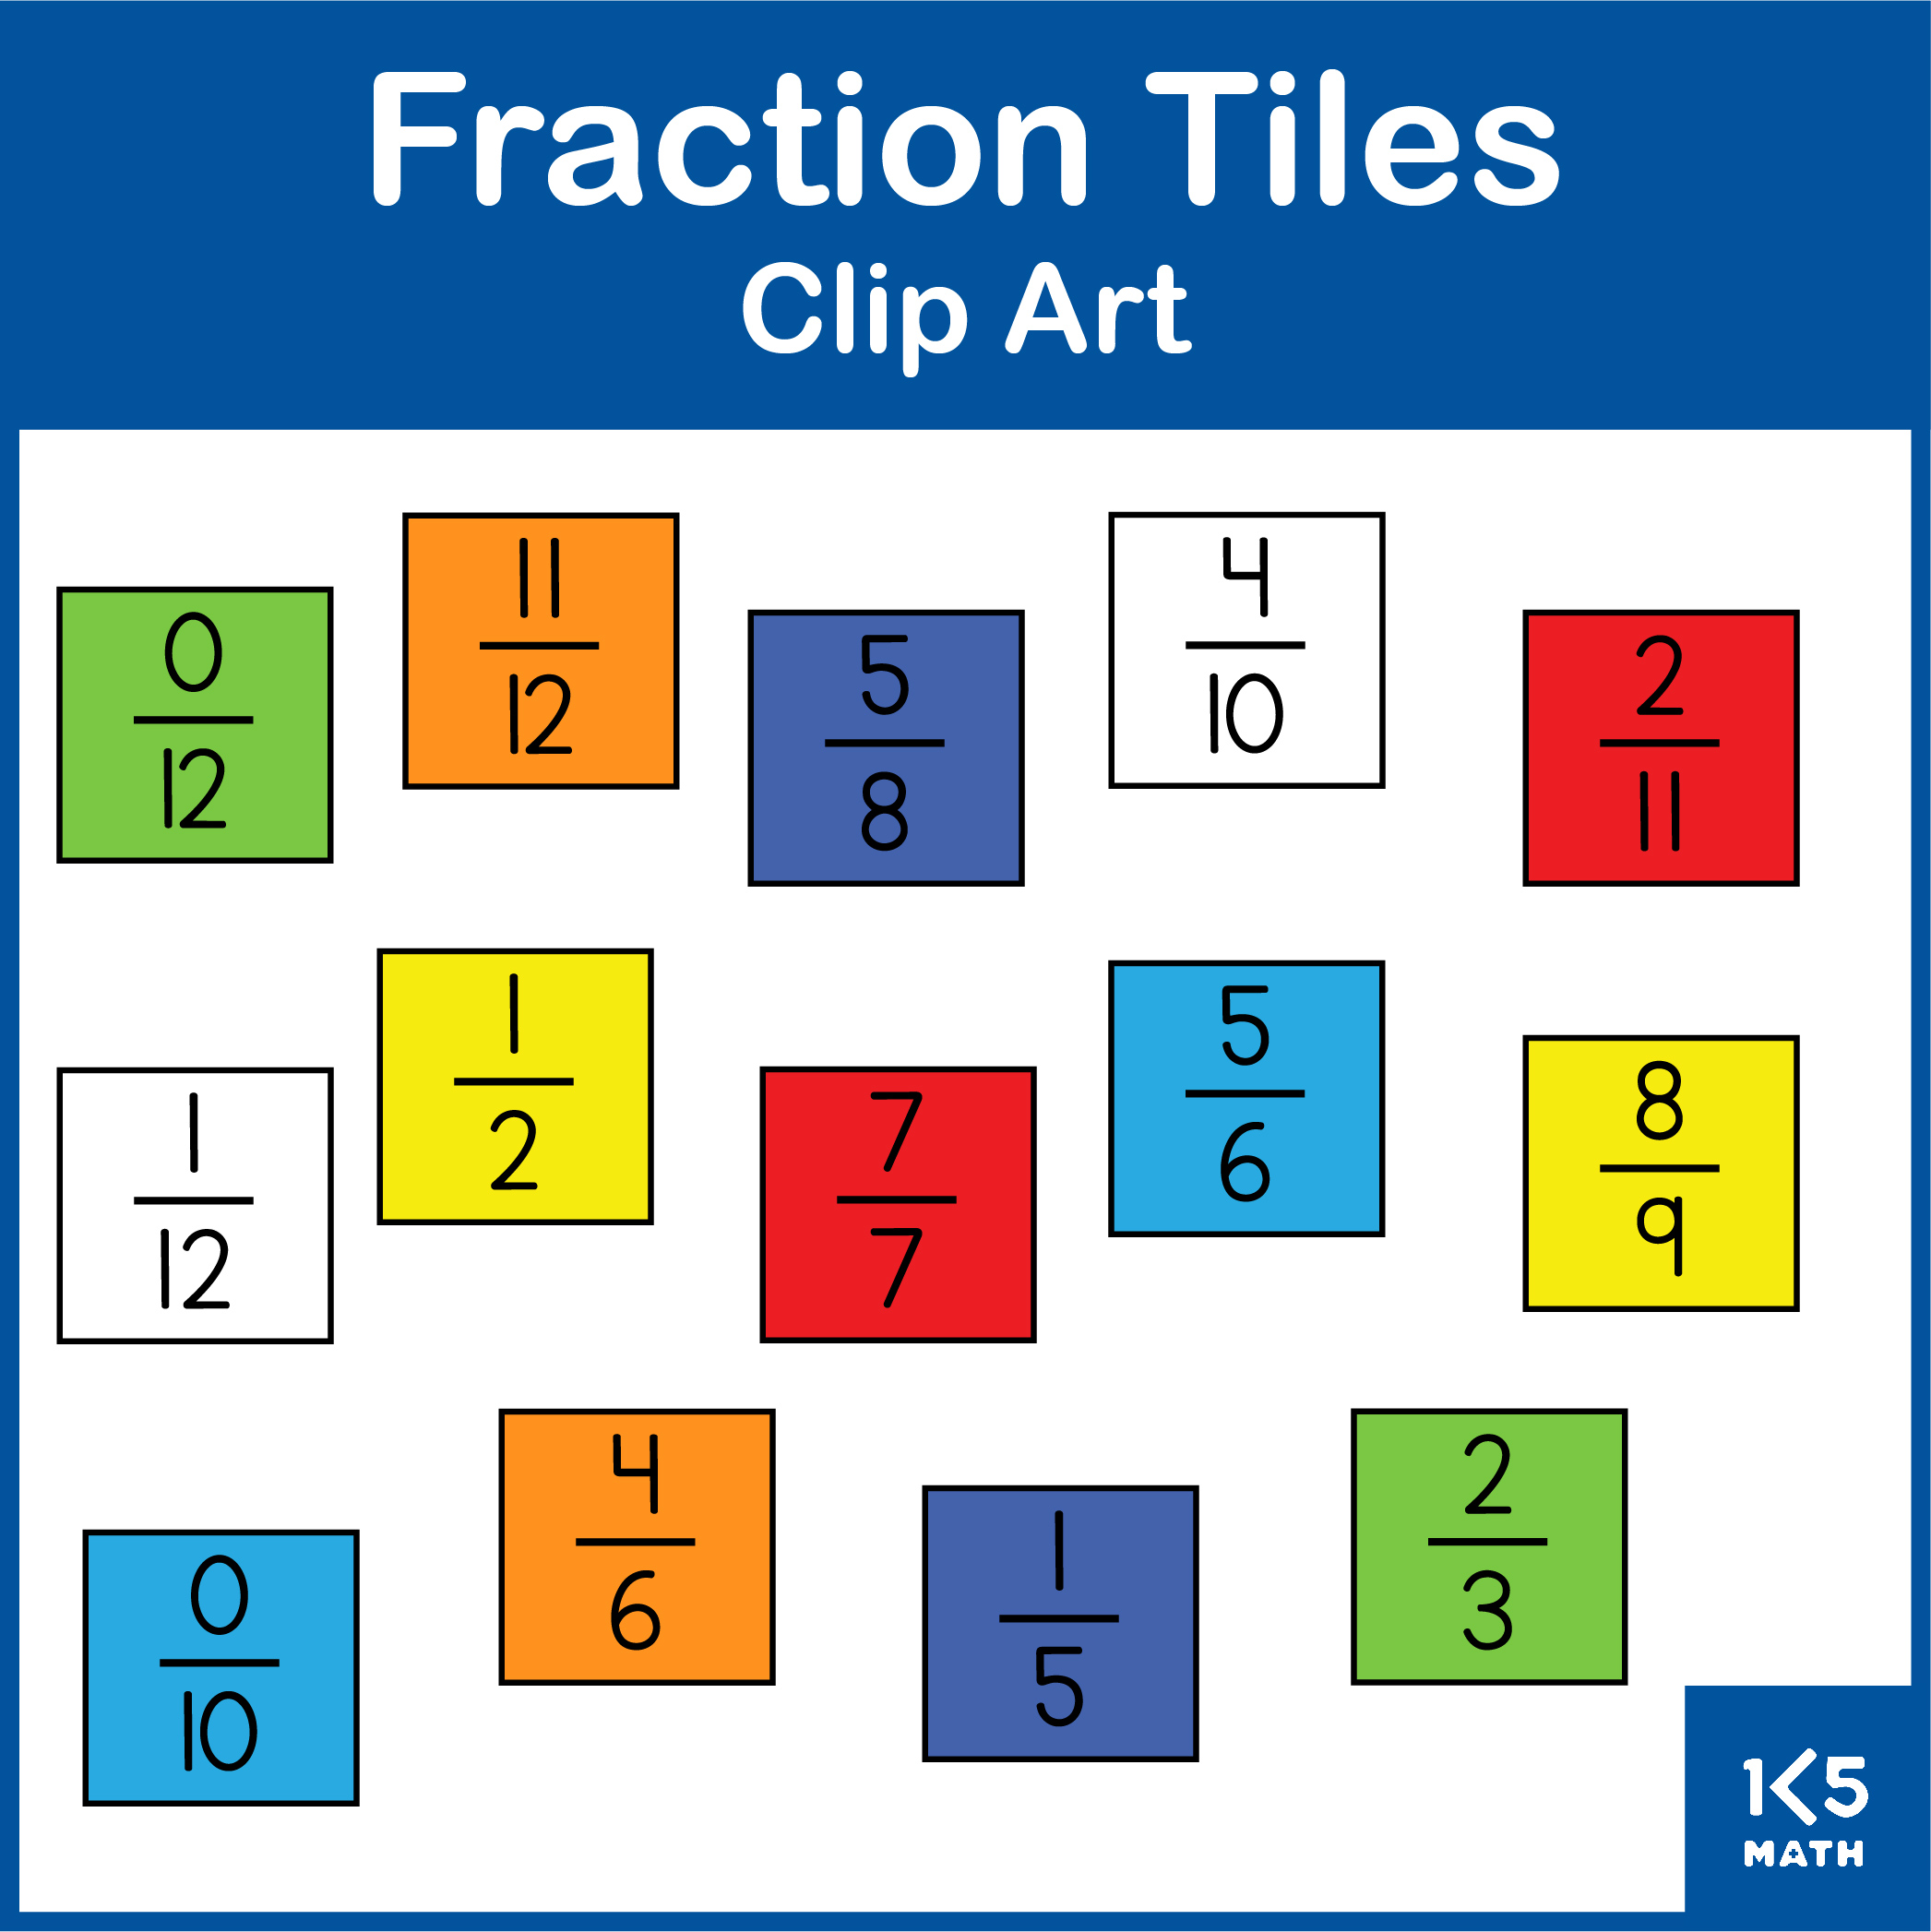 mixed fractions clipart